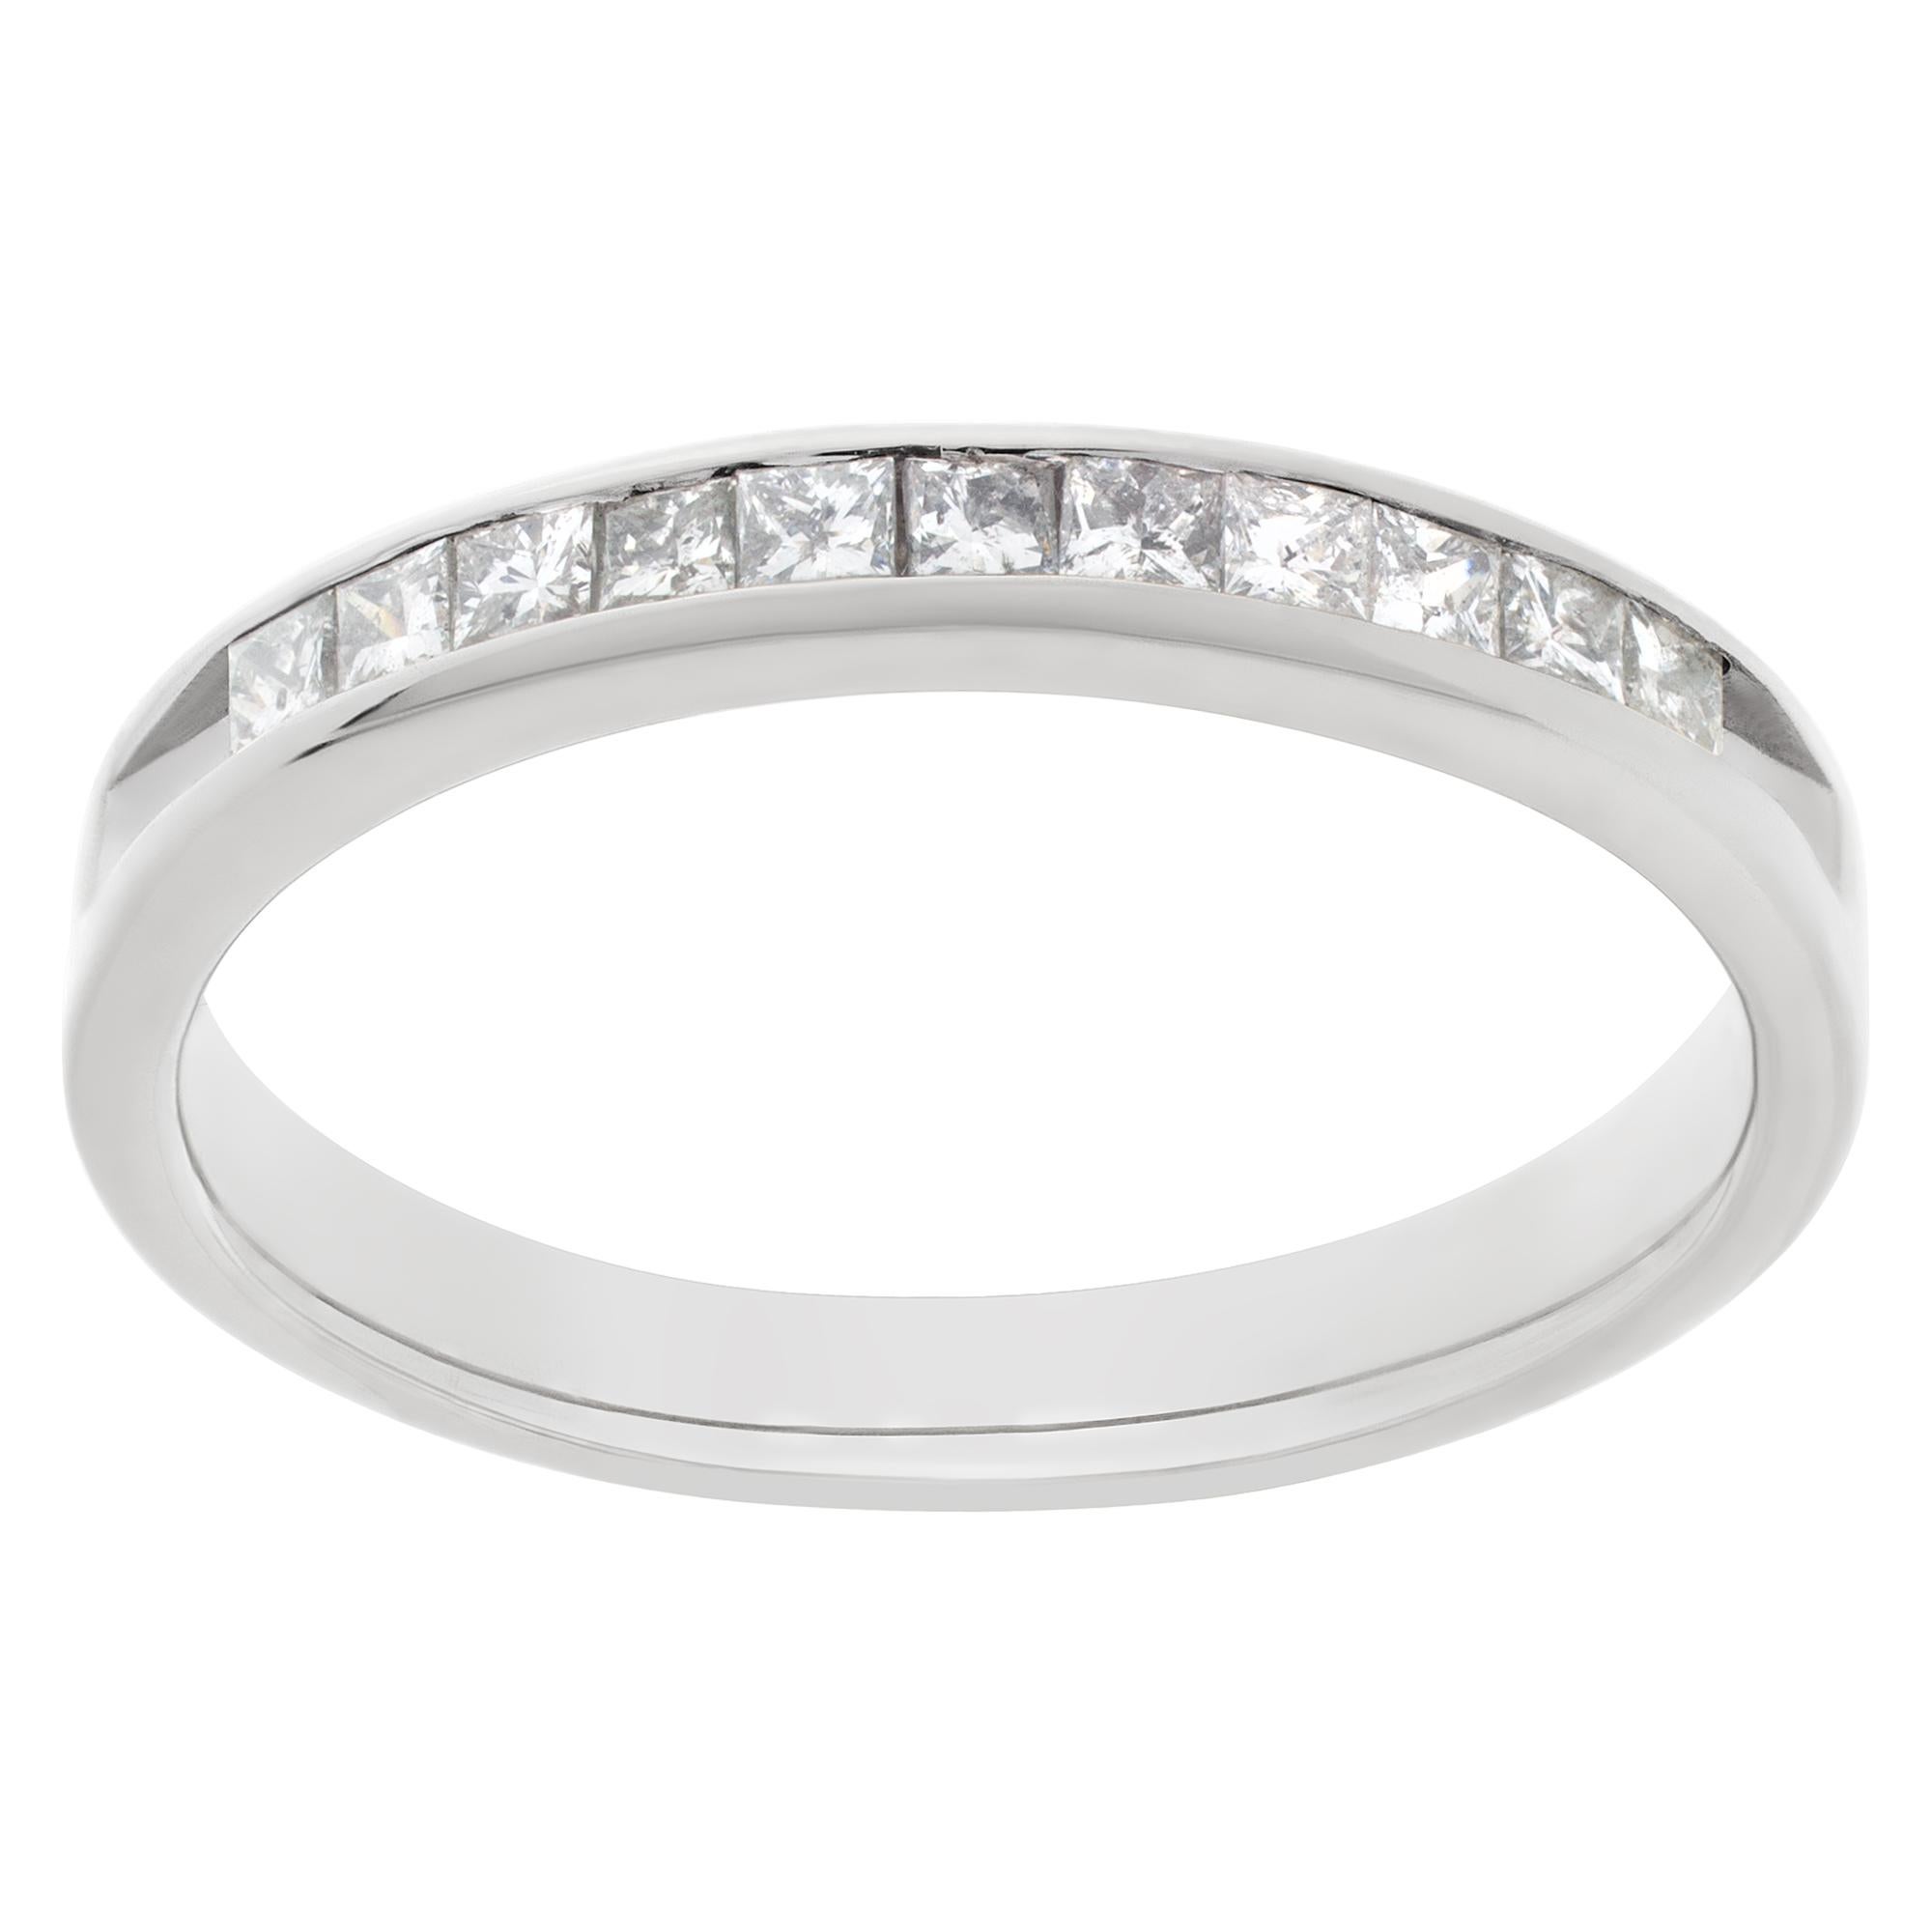 Thin & elegant semi diamond eternity band in 14k white gold ring with app. 0.55 carats in princess cut diamonds; size 6 1/4

This Diamond ring is currently size 6.25 and some items can be sized up or down, please ask! It weighs 1.6 pennyweights and